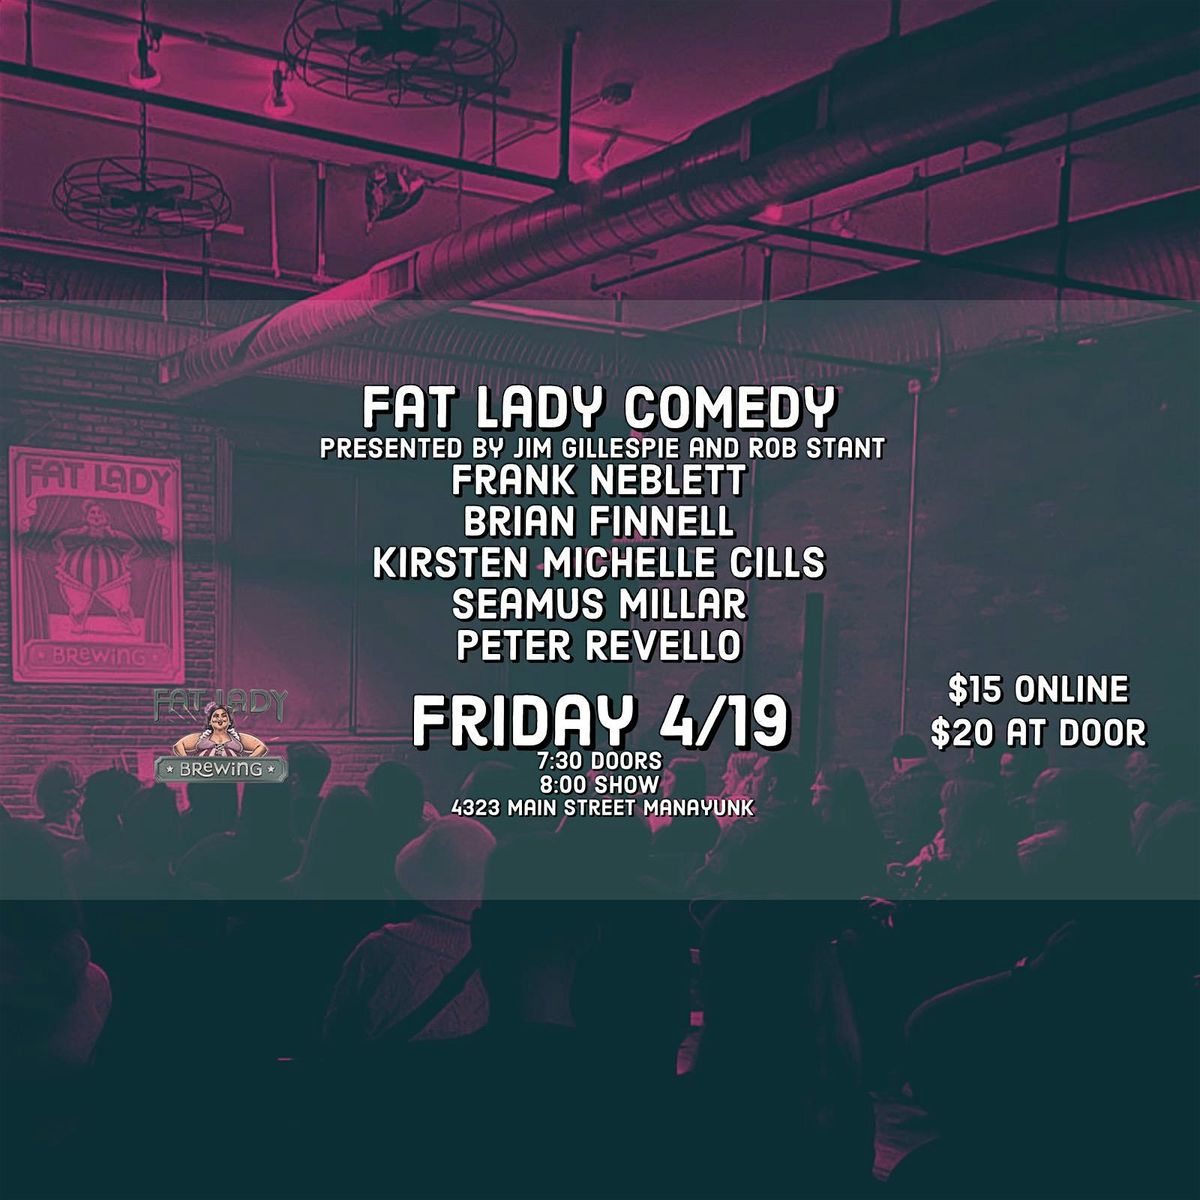 Fat Lady Comedy Presented by Jim Gillespie and Rob Stant